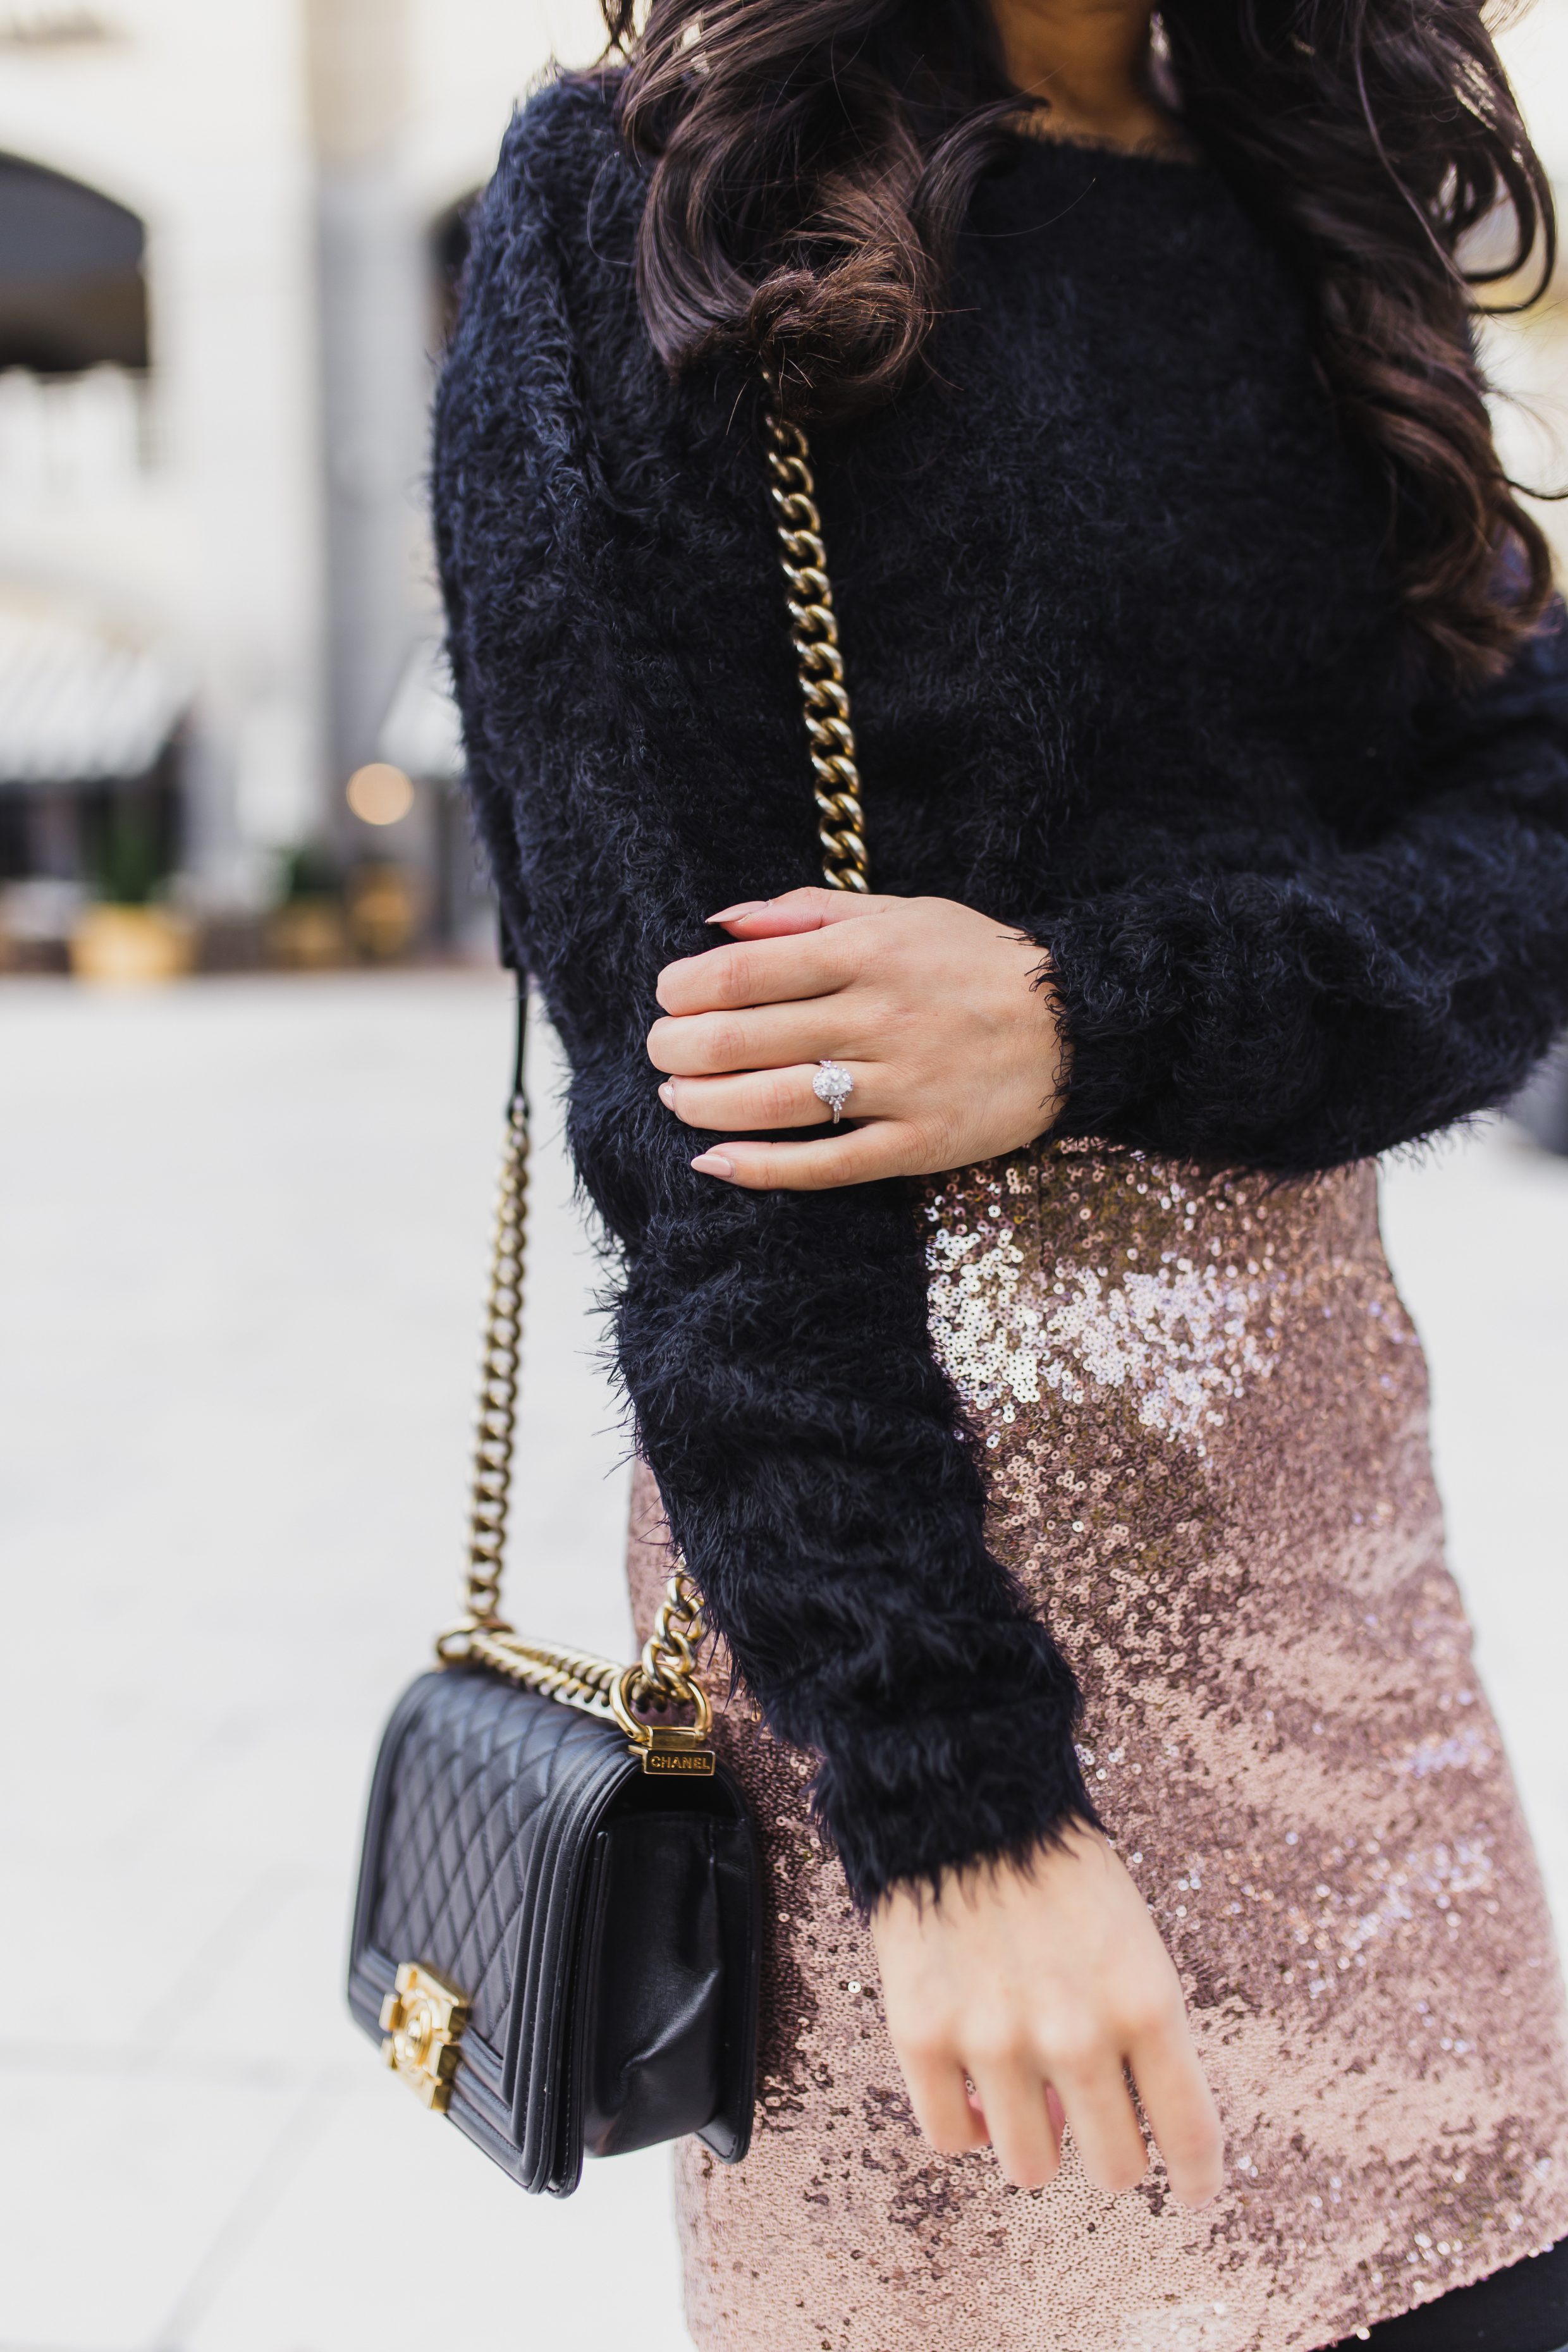 Rose gold sequin skirt and fuzzy sweater for the holidays